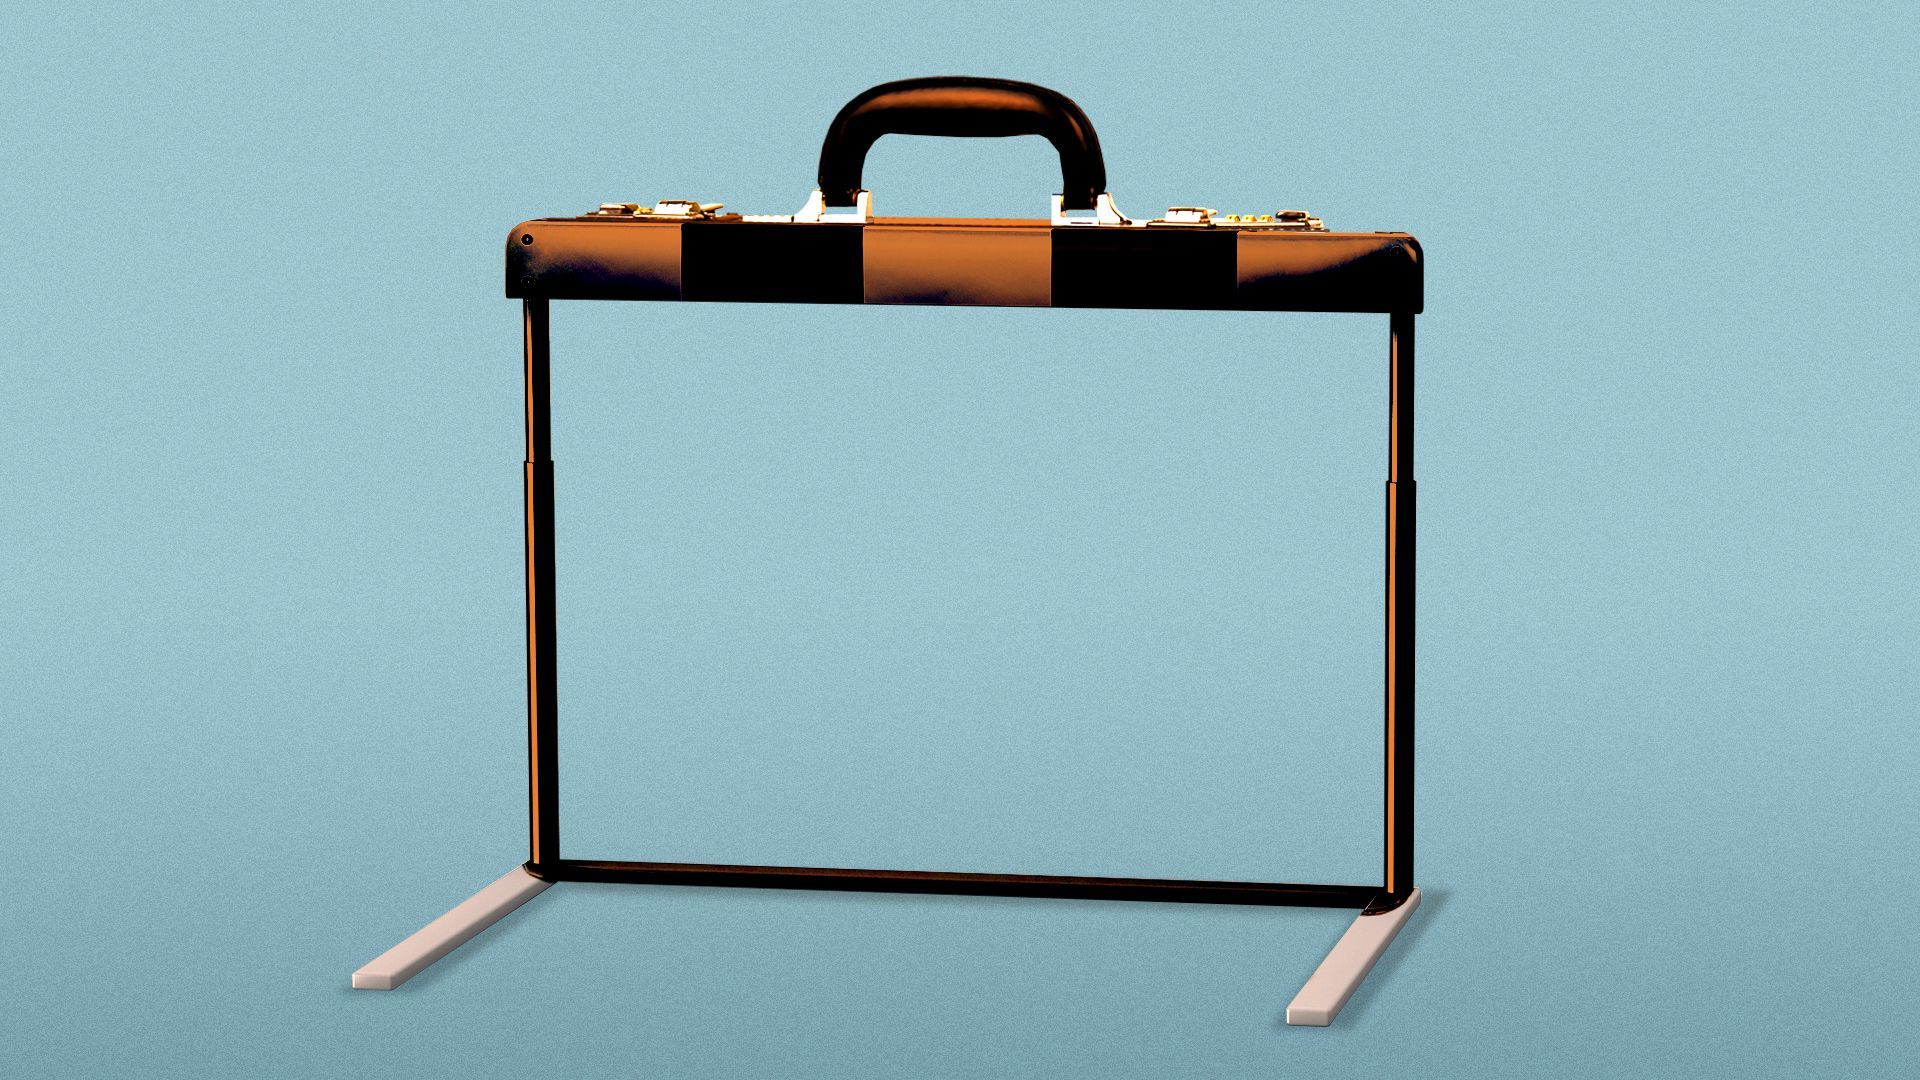 Illustration of a hurdle shaped and colored like a leather briefcase